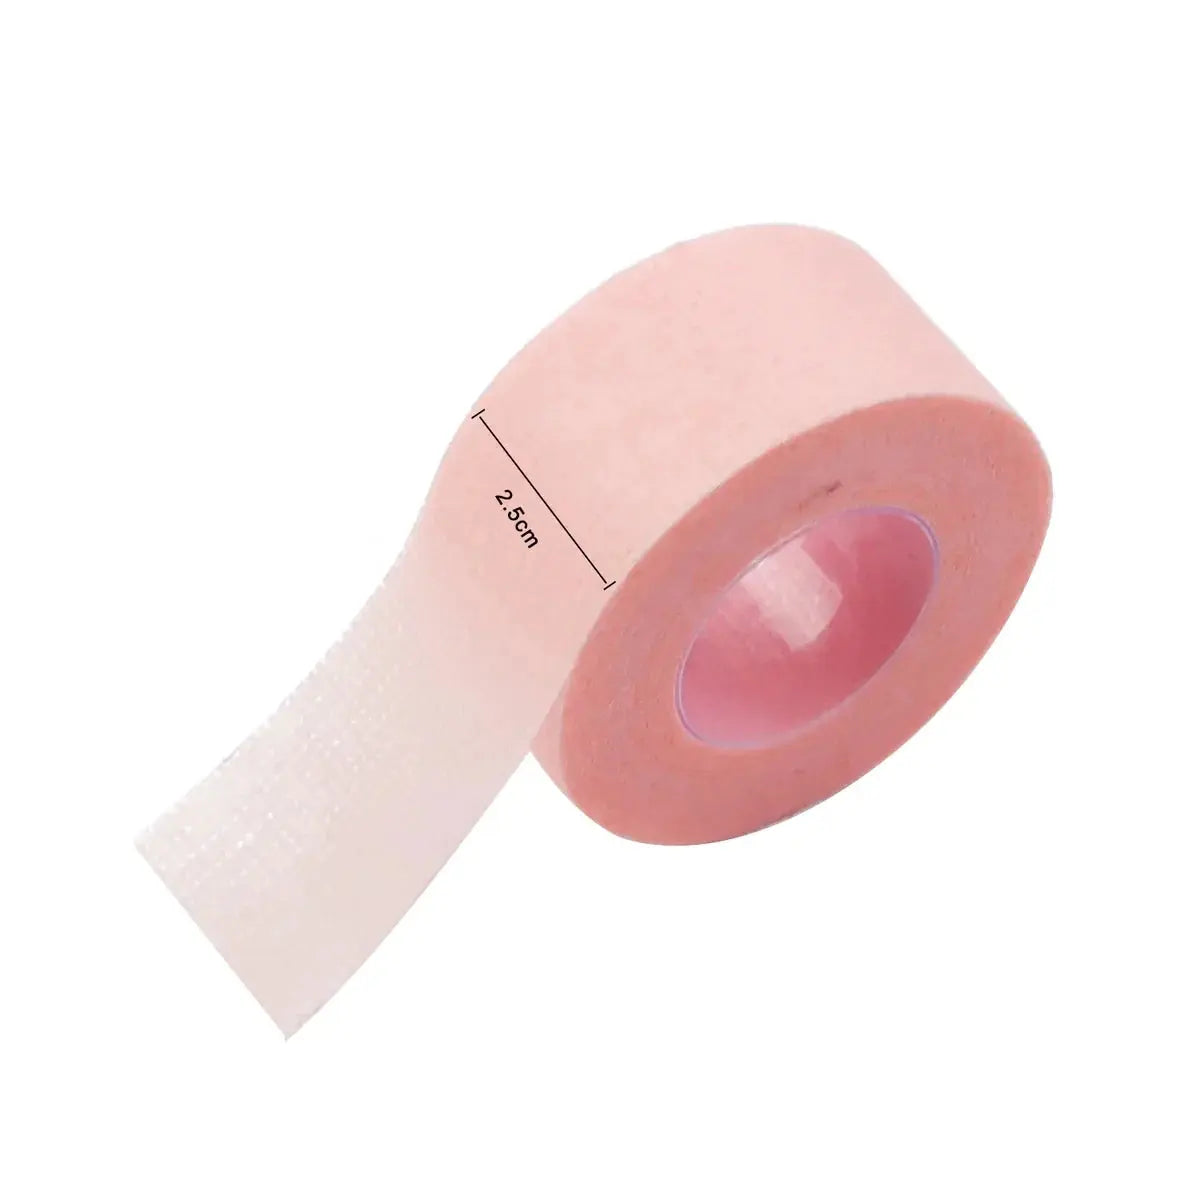 Large Paper Tape for Eyelash Extensions seerbeauty